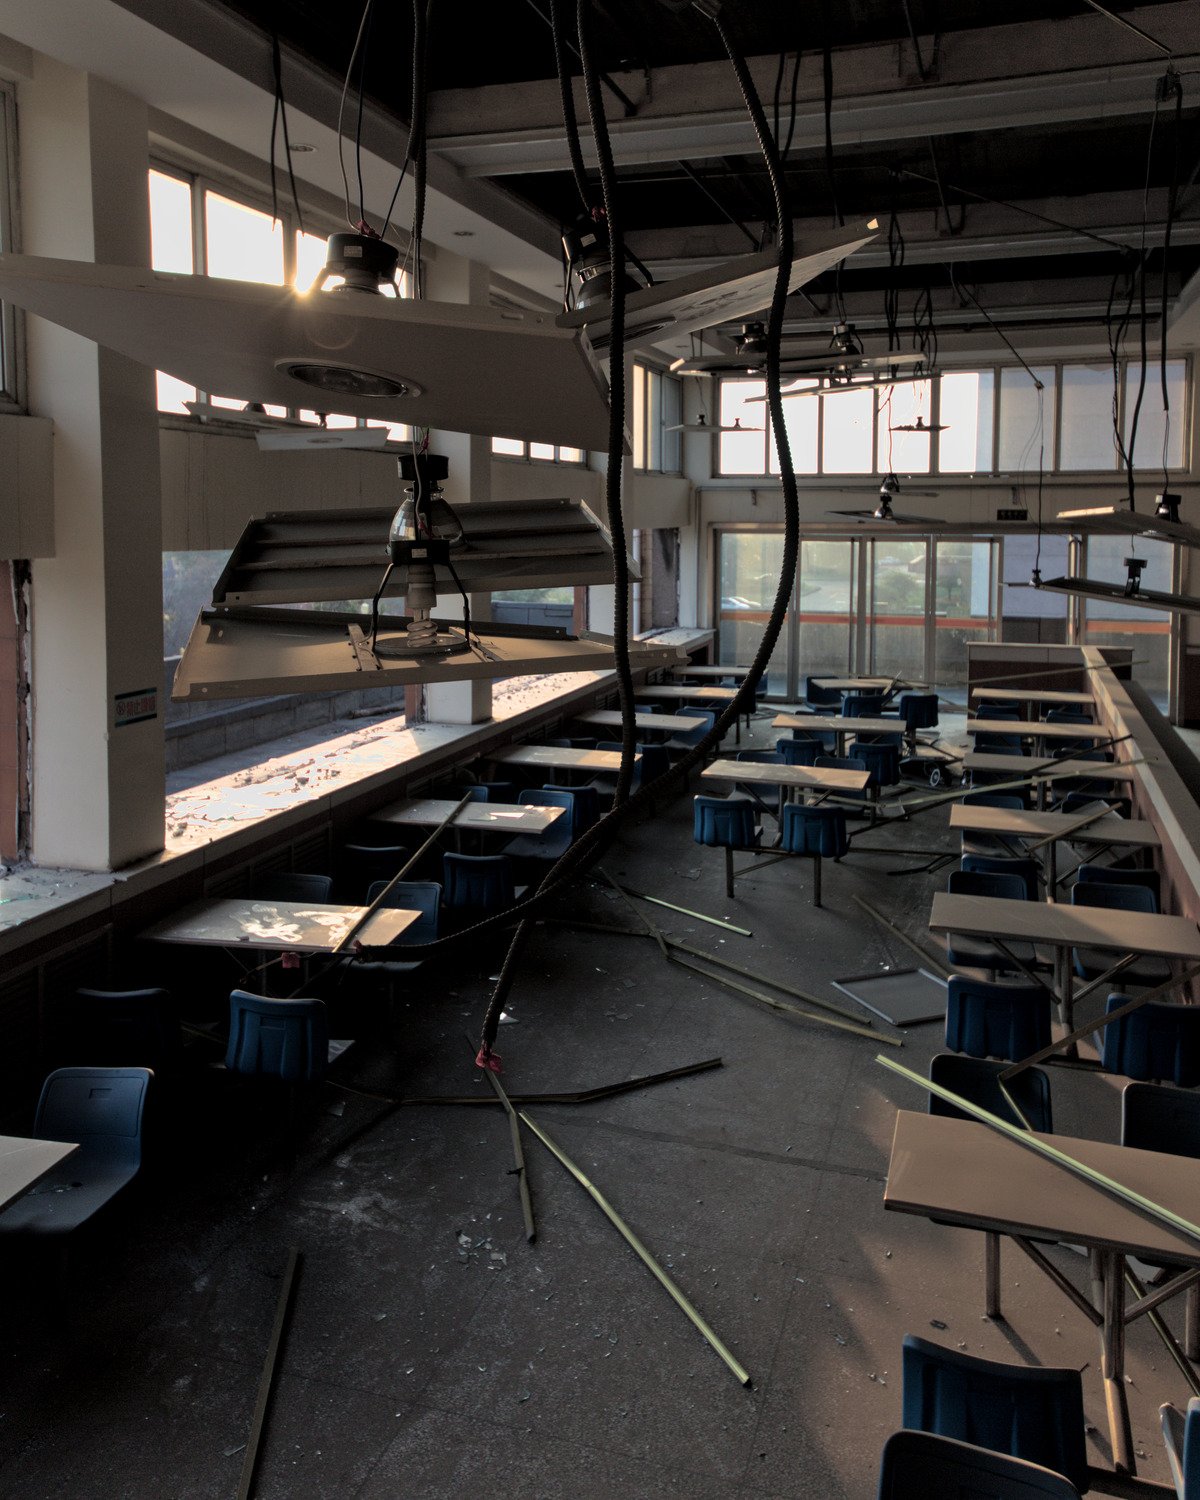 resized_JN Iron and Steel Cafeteria [46516].jpg